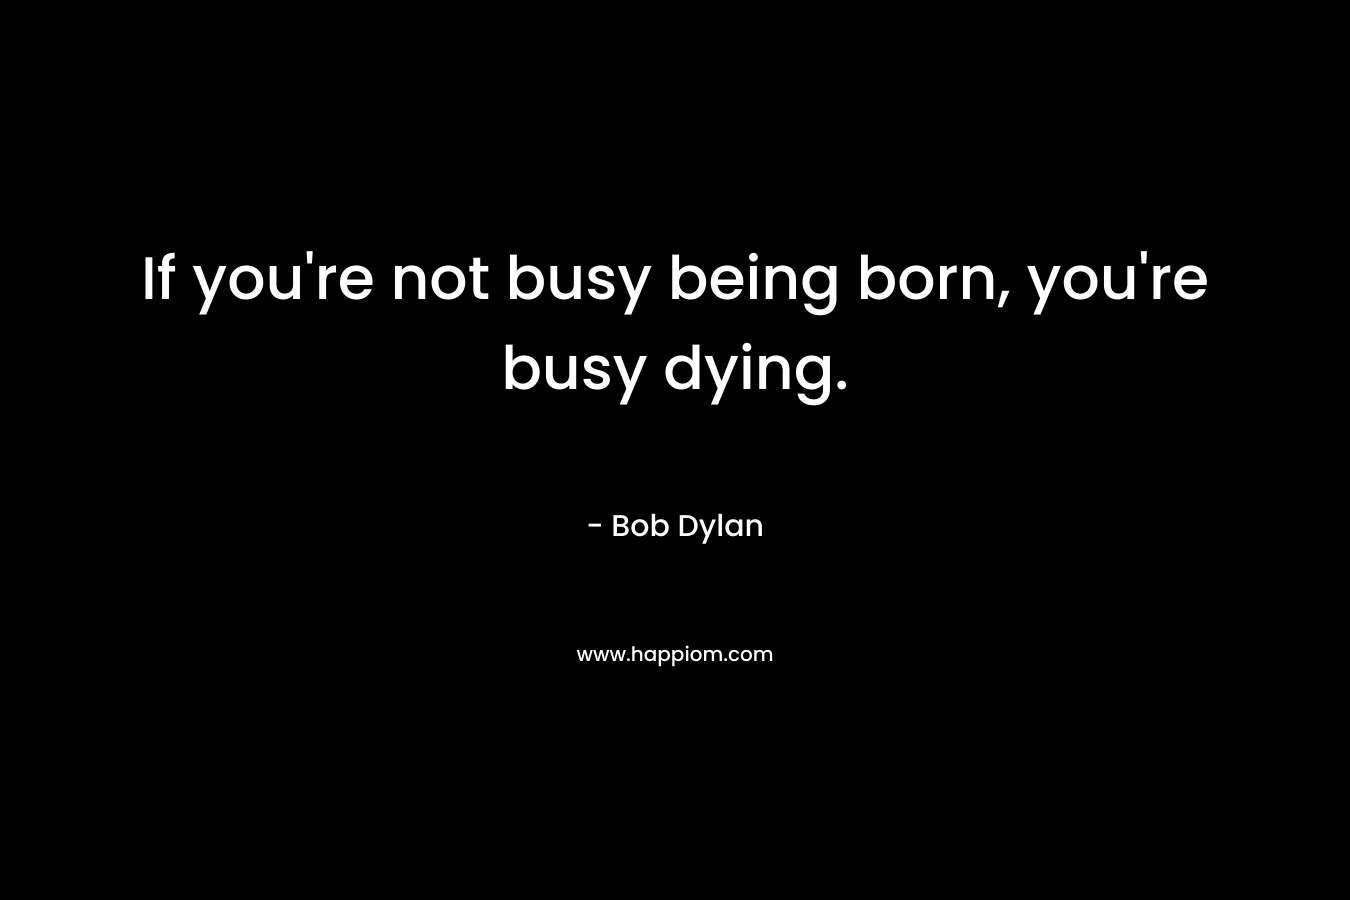 If you're not busy being born, you're busy dying.